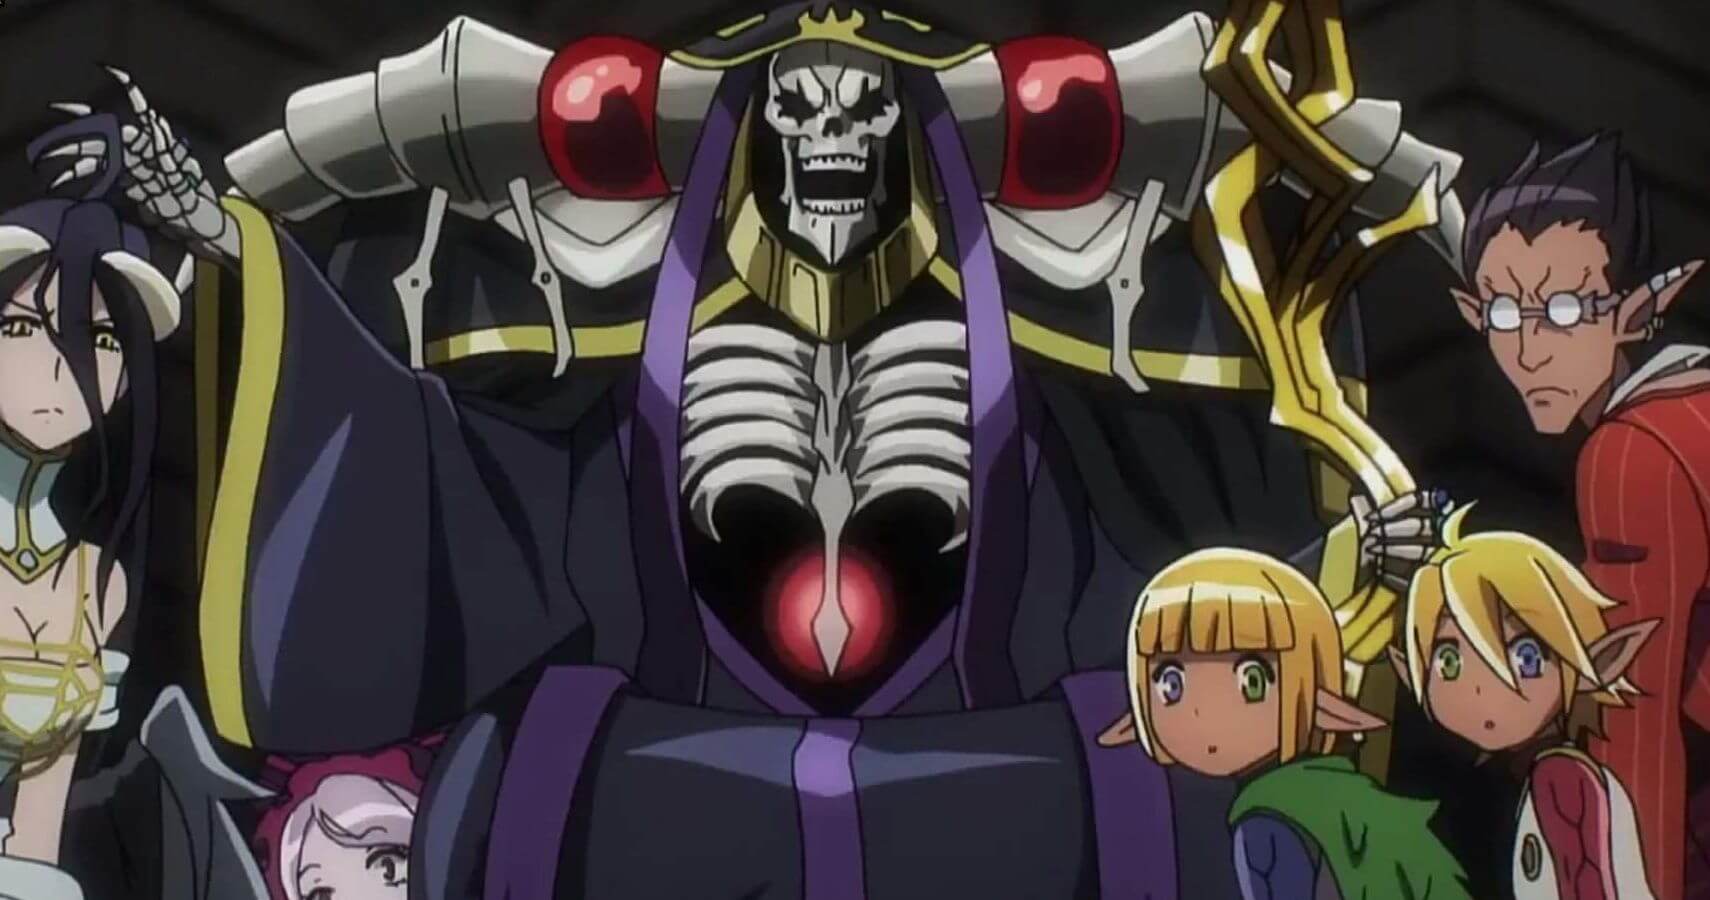 Overlord Season 4 Cast: Who can be in it?